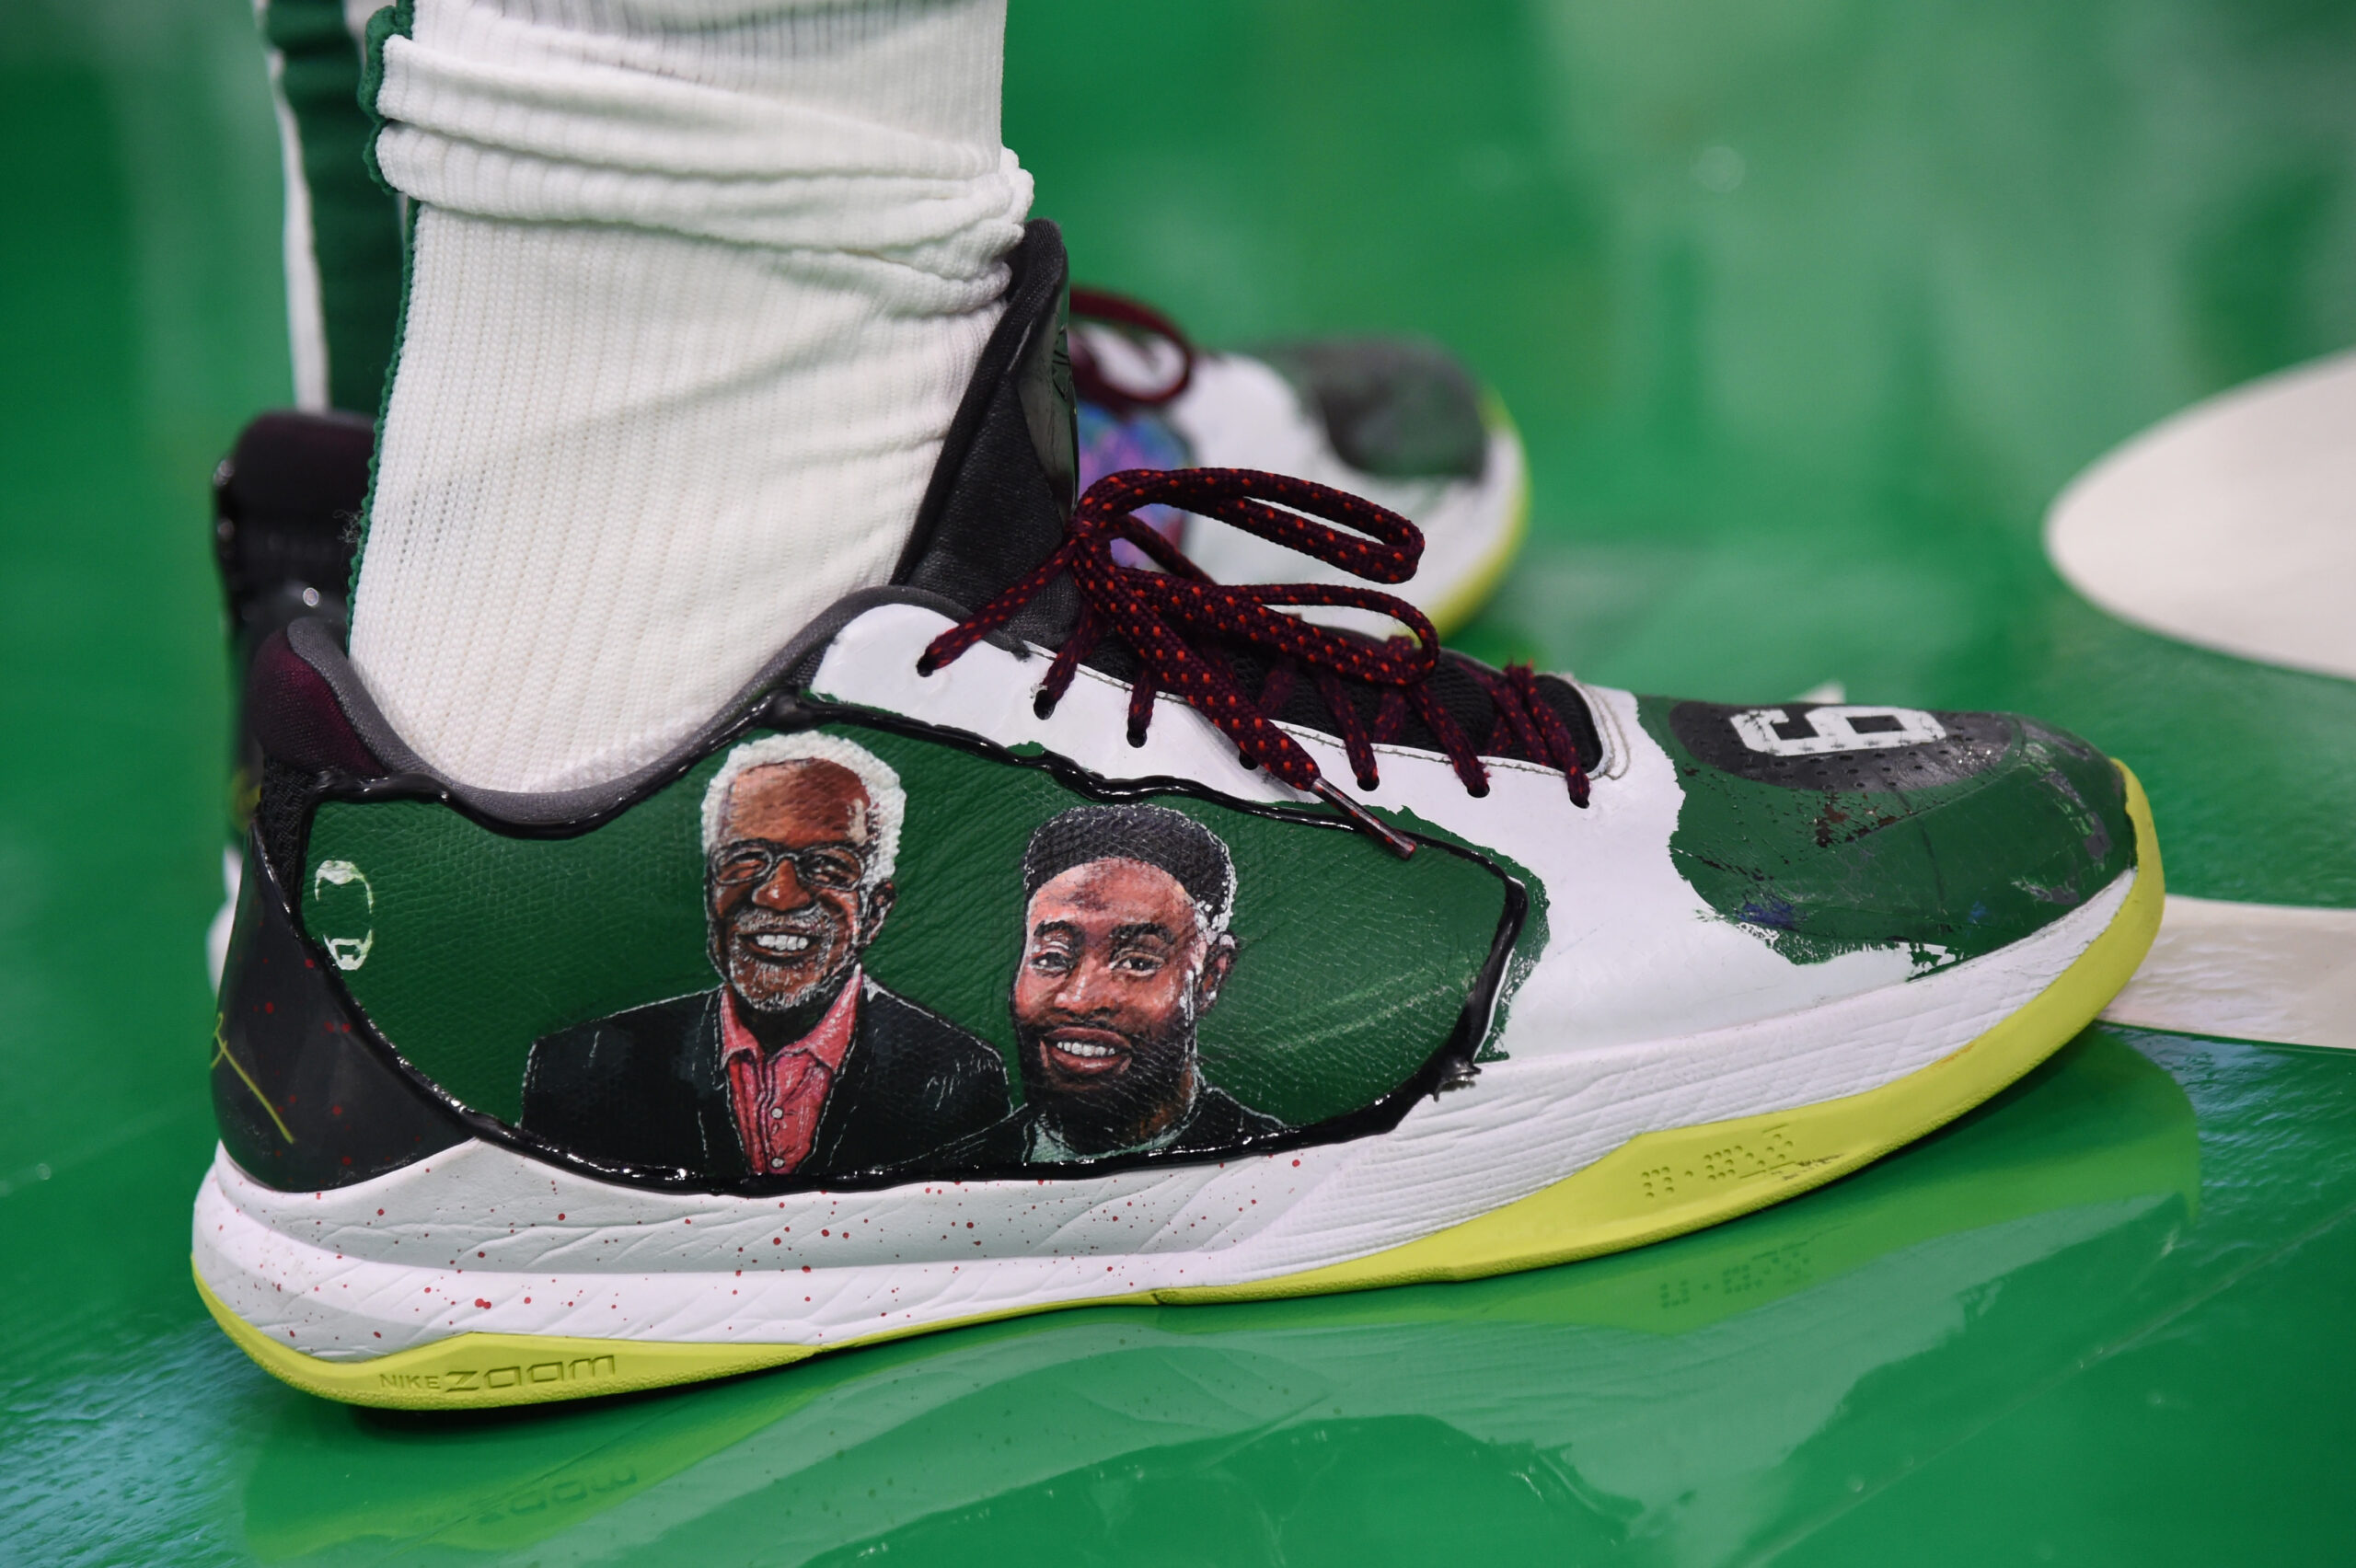 A history of Boston Celtics forward Jaylen Brown’s sneakers in photos